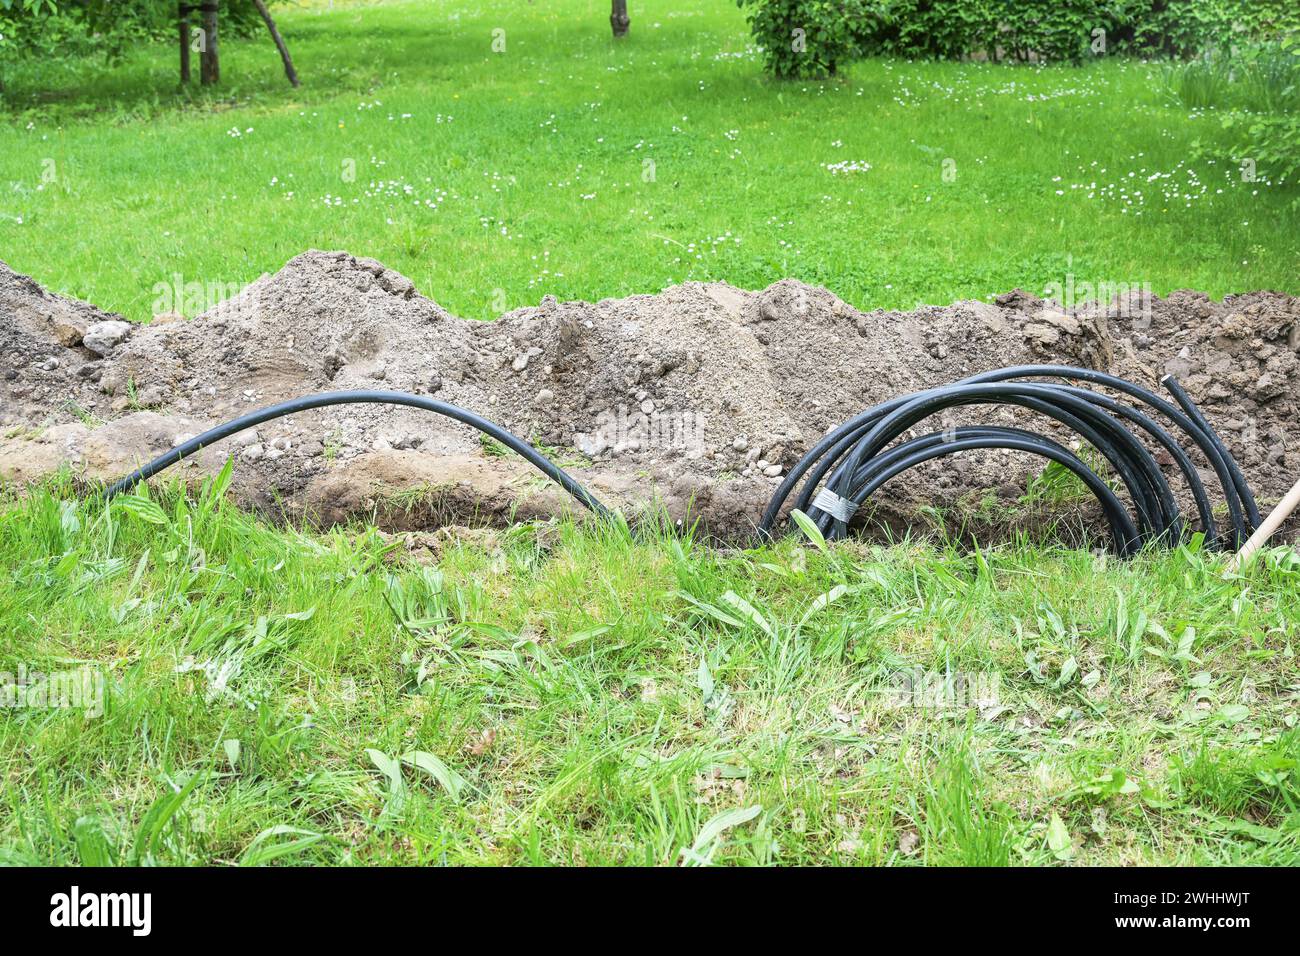 Black power cable is laid in a narrow trench in the grass across the garden, because it is a safer power supply than overhead li Stock Photo